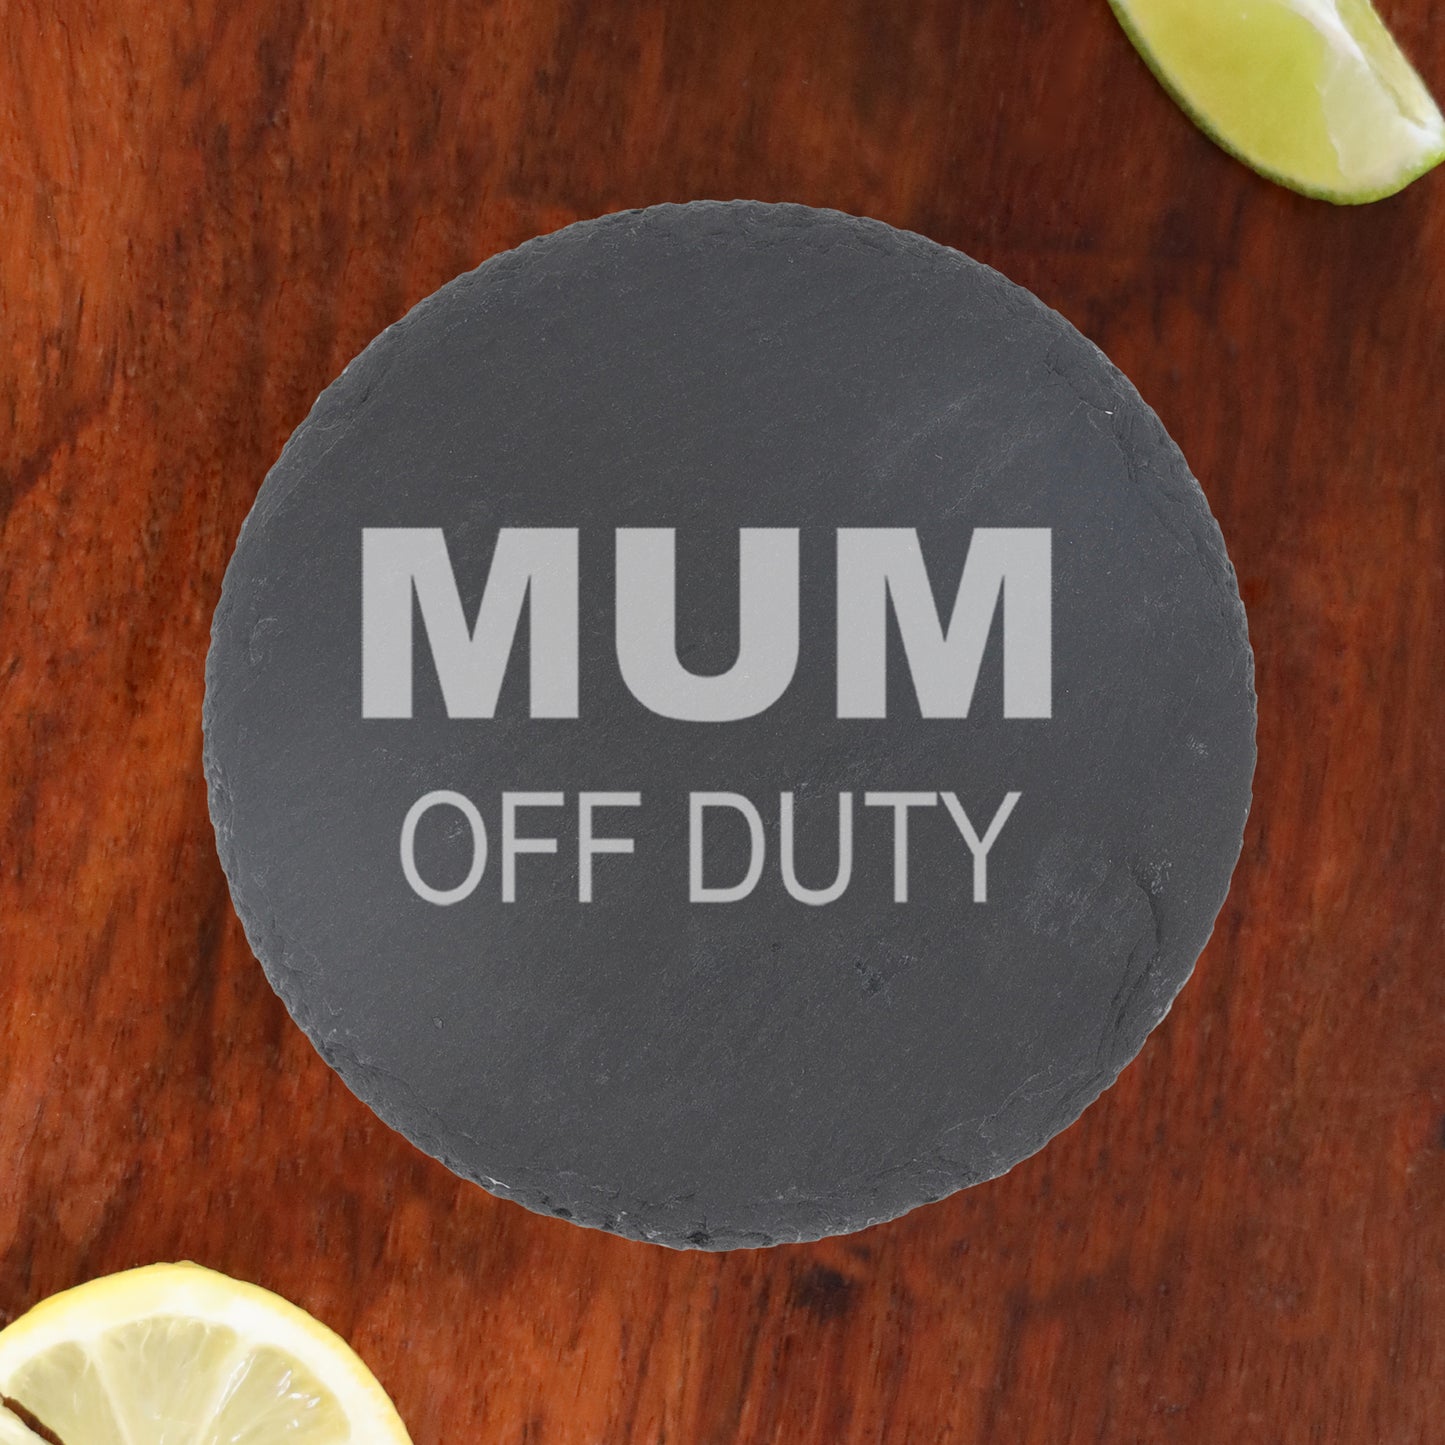 Engraved "Mum Off Duty" Novelty Wine Glass and/or Coaster Set  - Always Looking Good - Round Coaster Only  